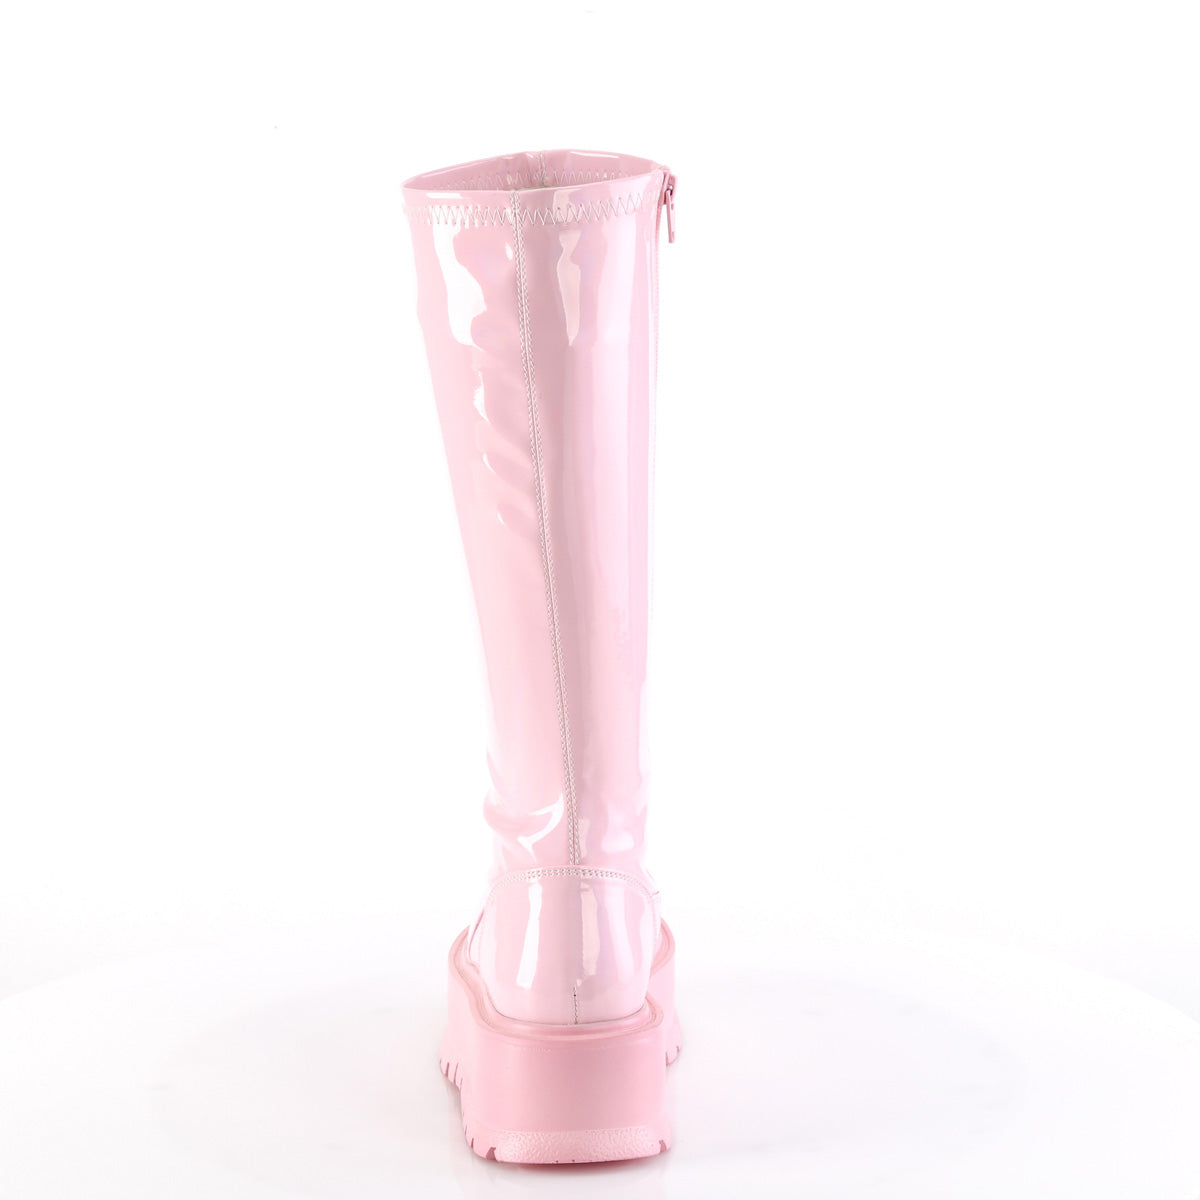 SLACKER-200 - Baby Pink Holo Patent Boots